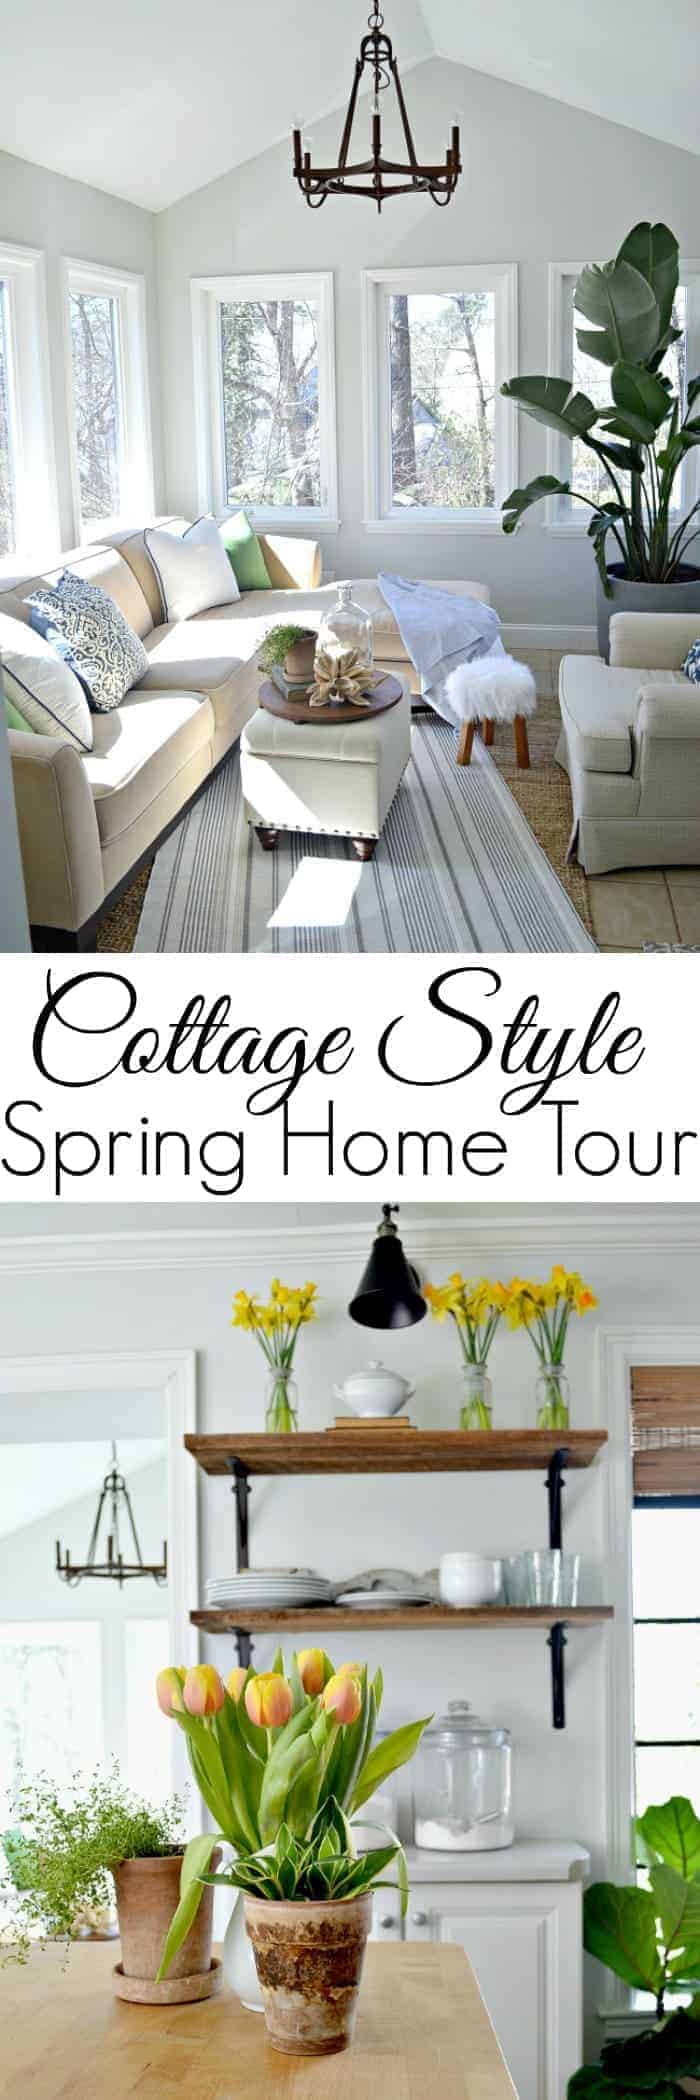 sunroom decorated with spring with a sectional sofa and striped rug plus yellow tulips on a butcher block kitchen island with wood shelves behind it